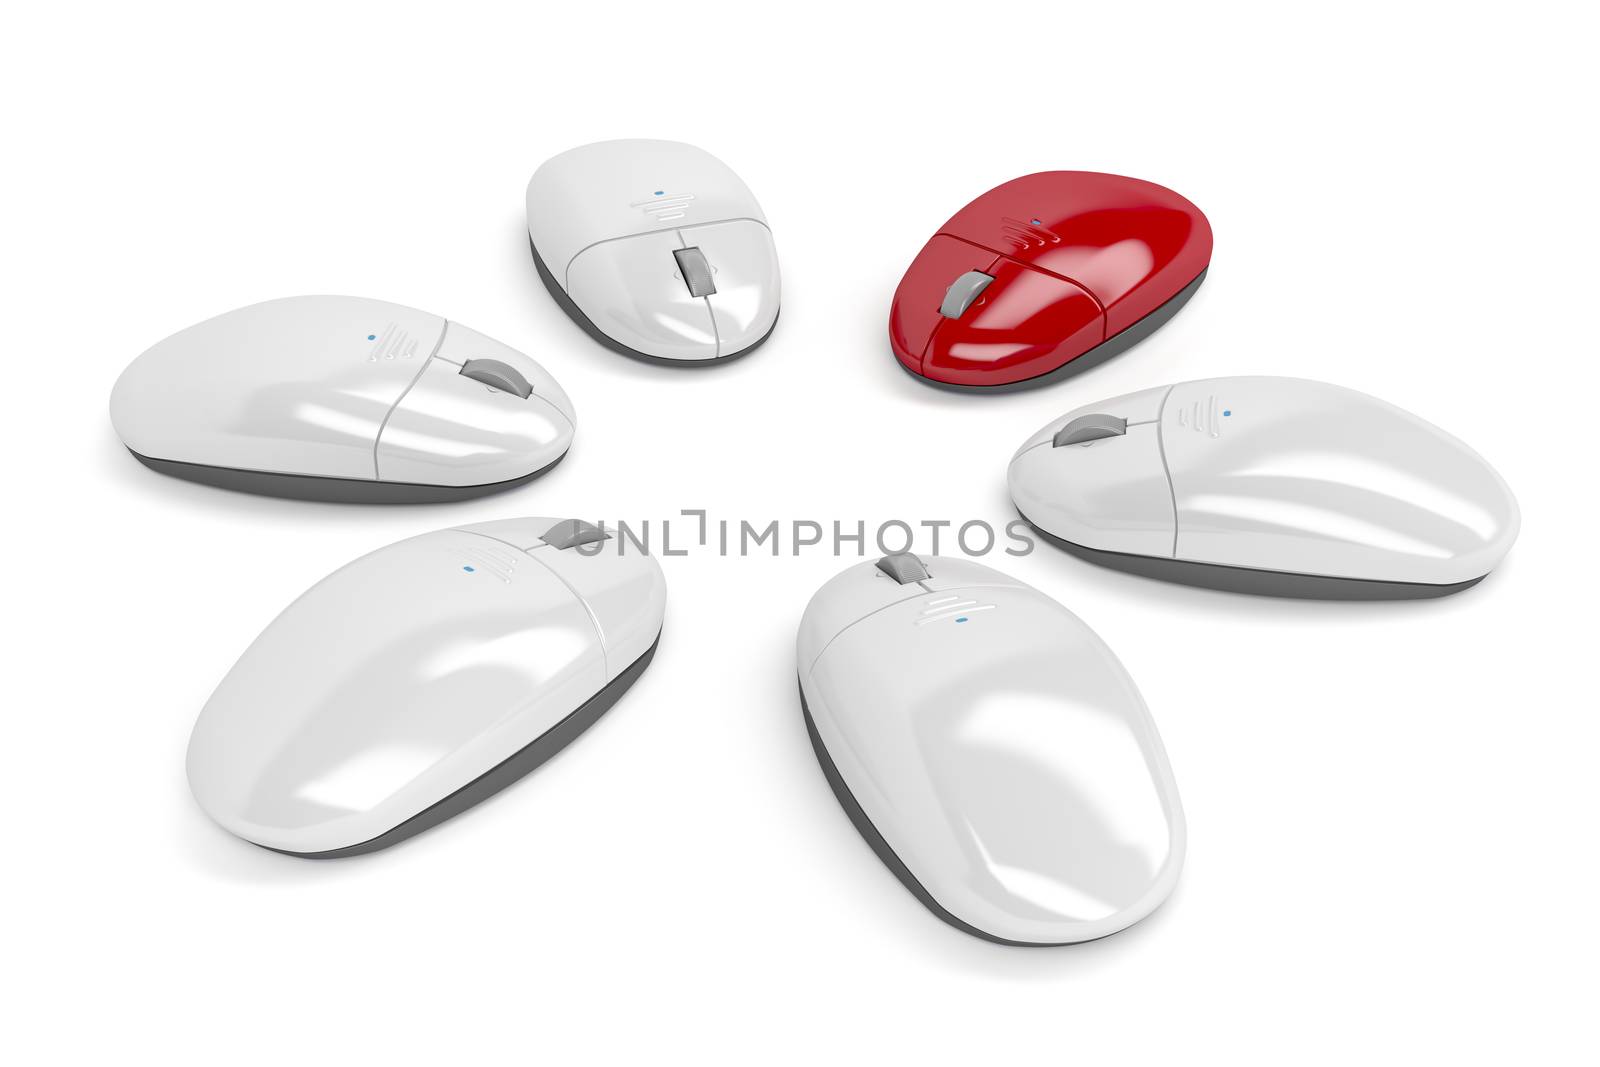 Red computer mouse by magraphics